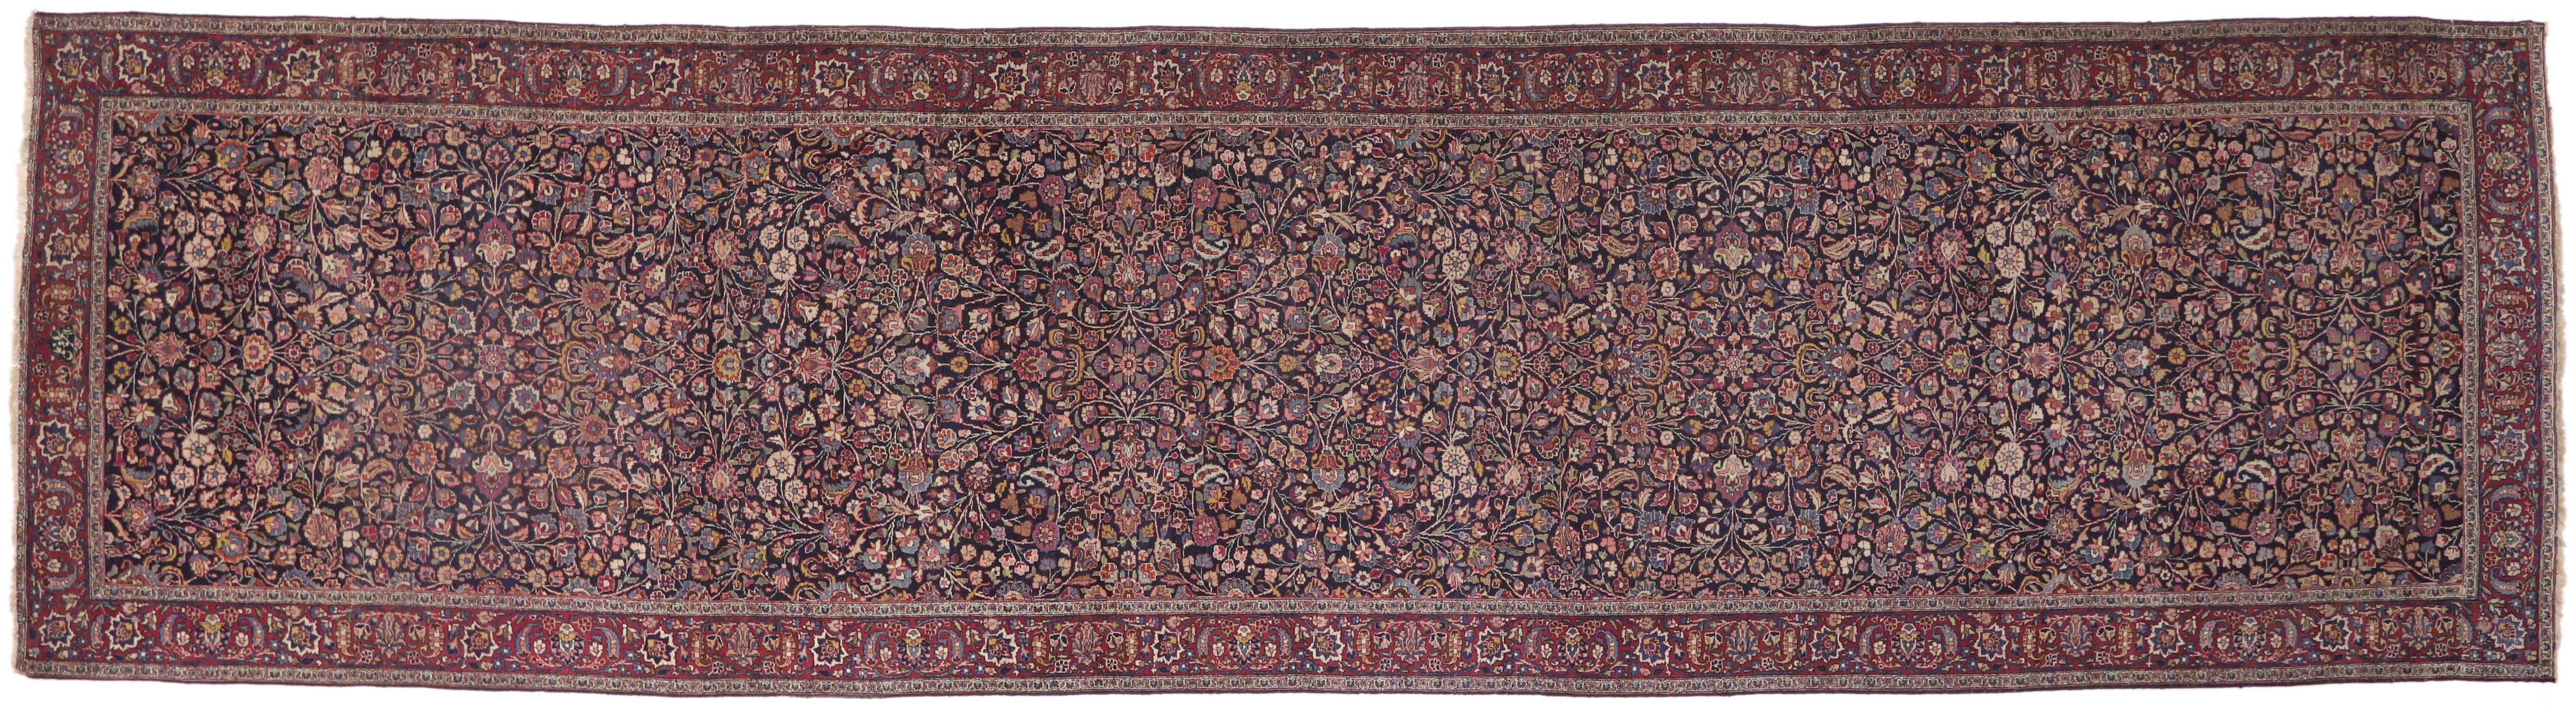 74288 ​Antique Persian Mashhad Runner with Old World Style, Extra Long Hallway Runner​ 05'07 x 21'04. Rich in color, texture and beguiling ambiance, this hand knotted wool antique Persian Mashhad rug runner beautifully displays timeless elegance and